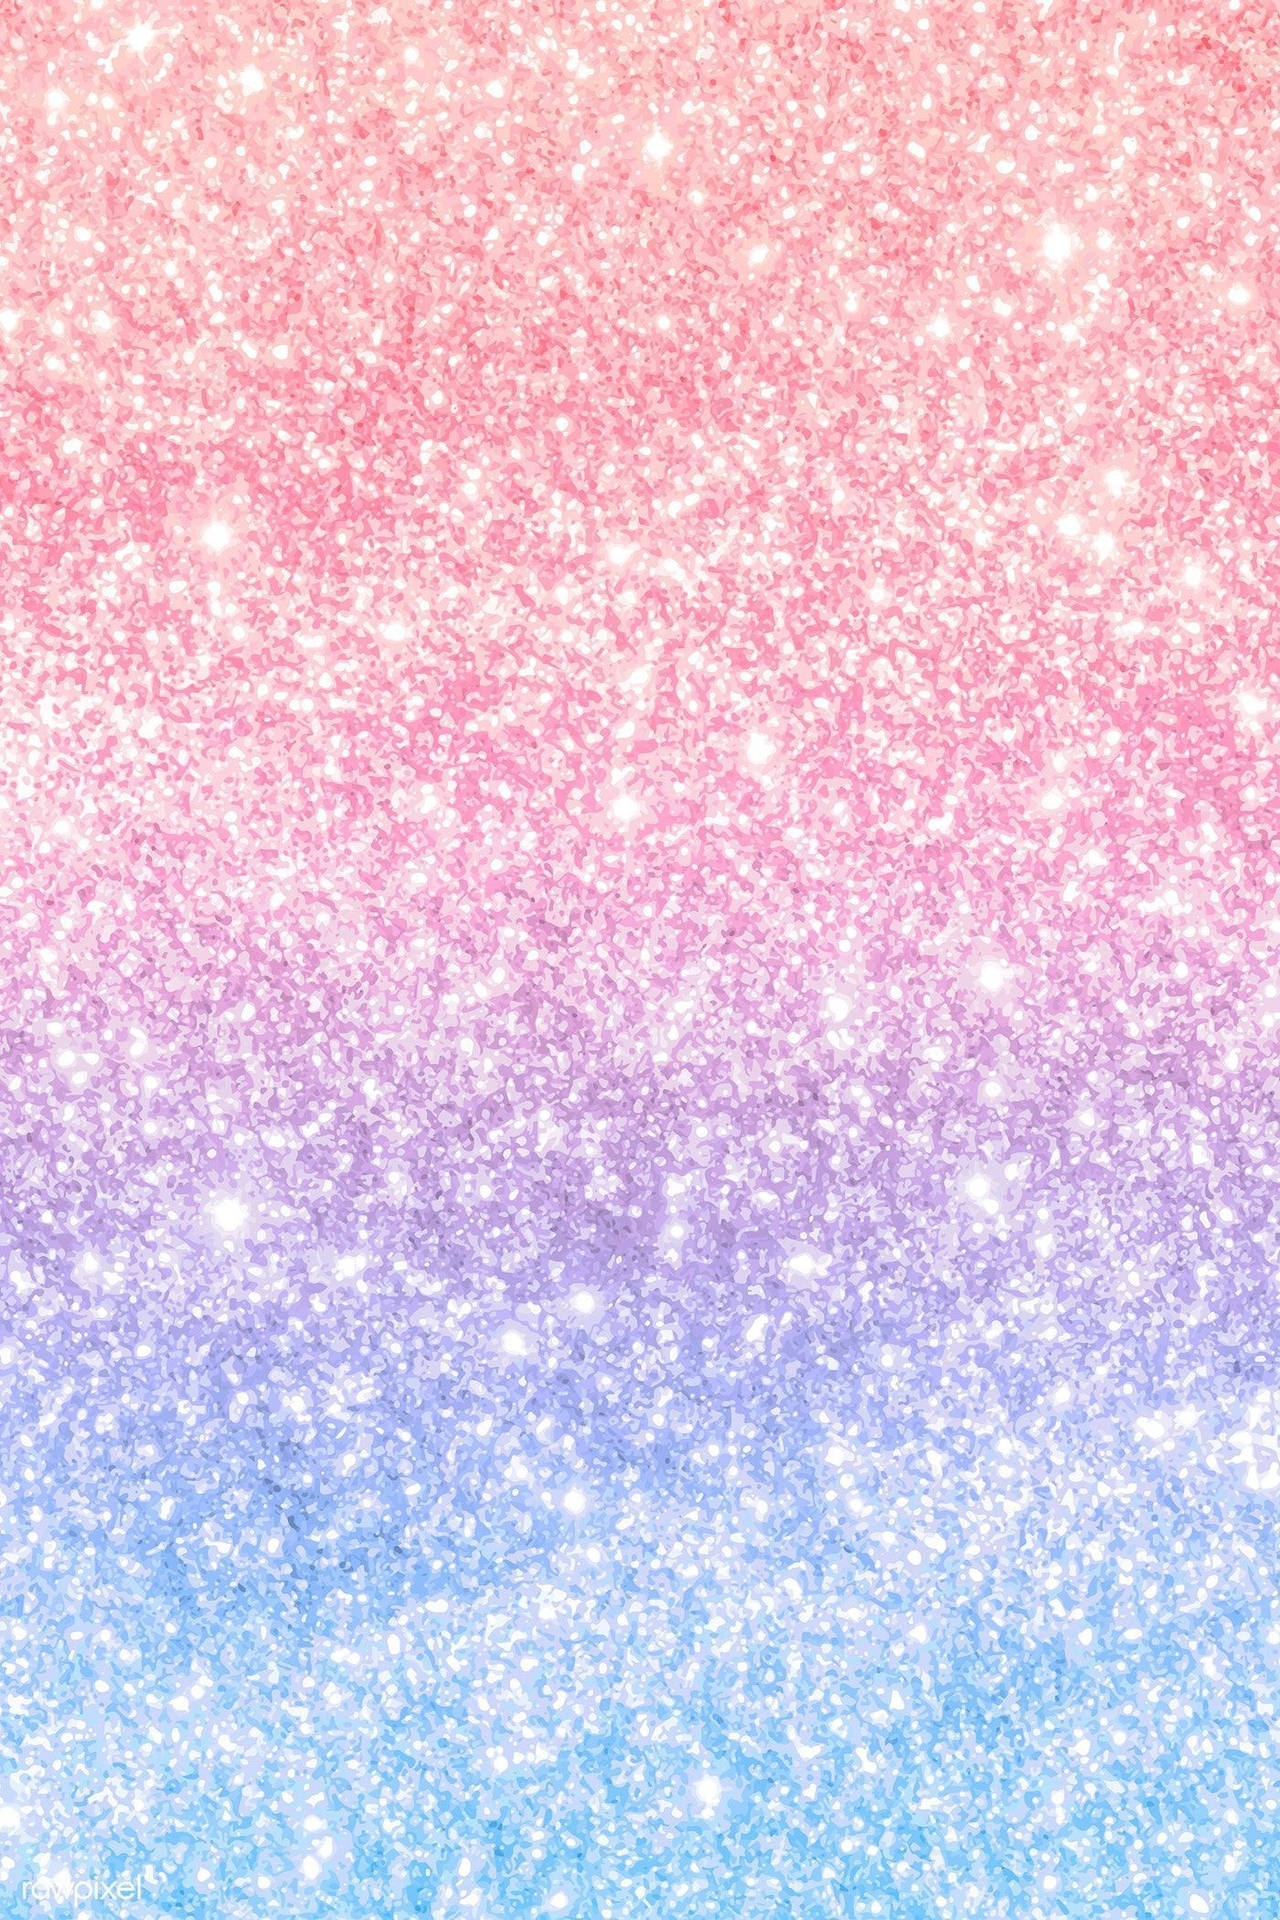 Pink And Blue Sparkling Glittery Wallpaper